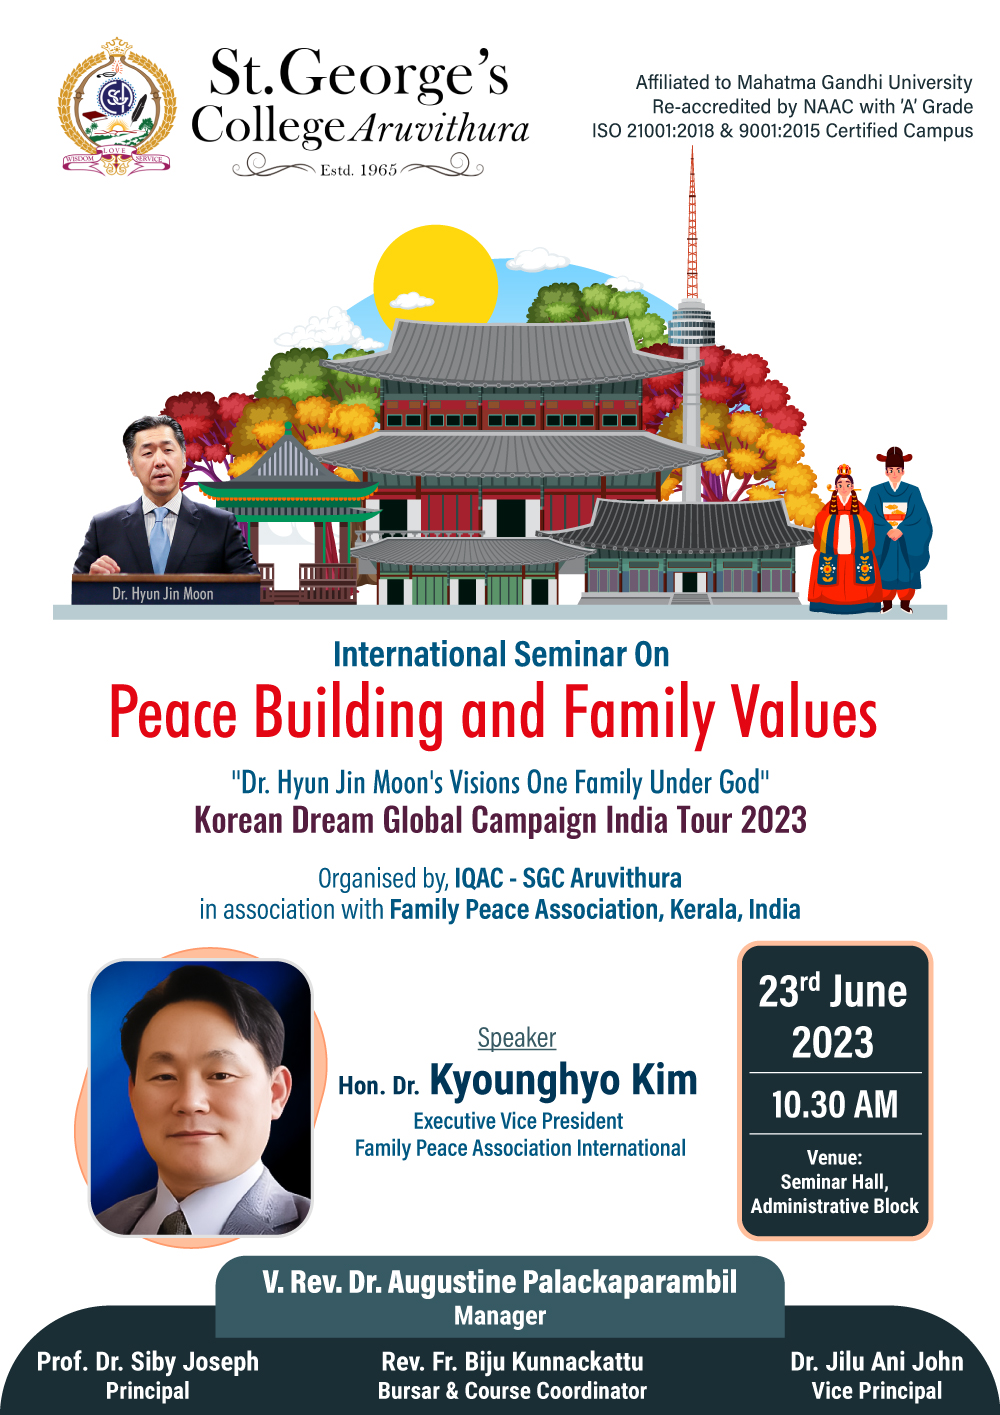 International Seminar on - Peace Building and Family Values